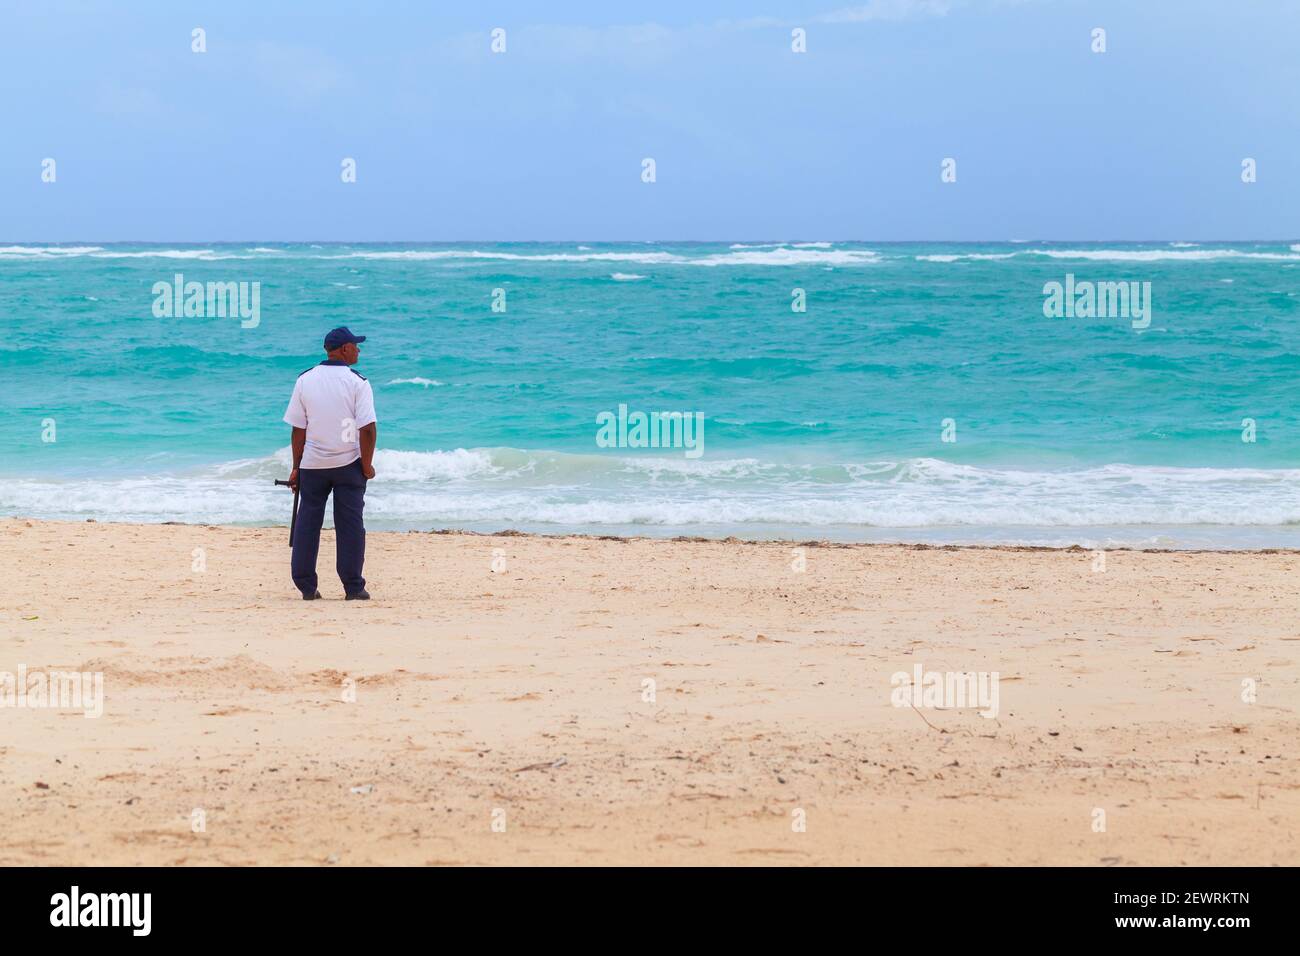 Punta Cana, Dominican republic - January 10, 2020: Security guard stands on a sandy beach of Punta Cana resort town Stock Photo